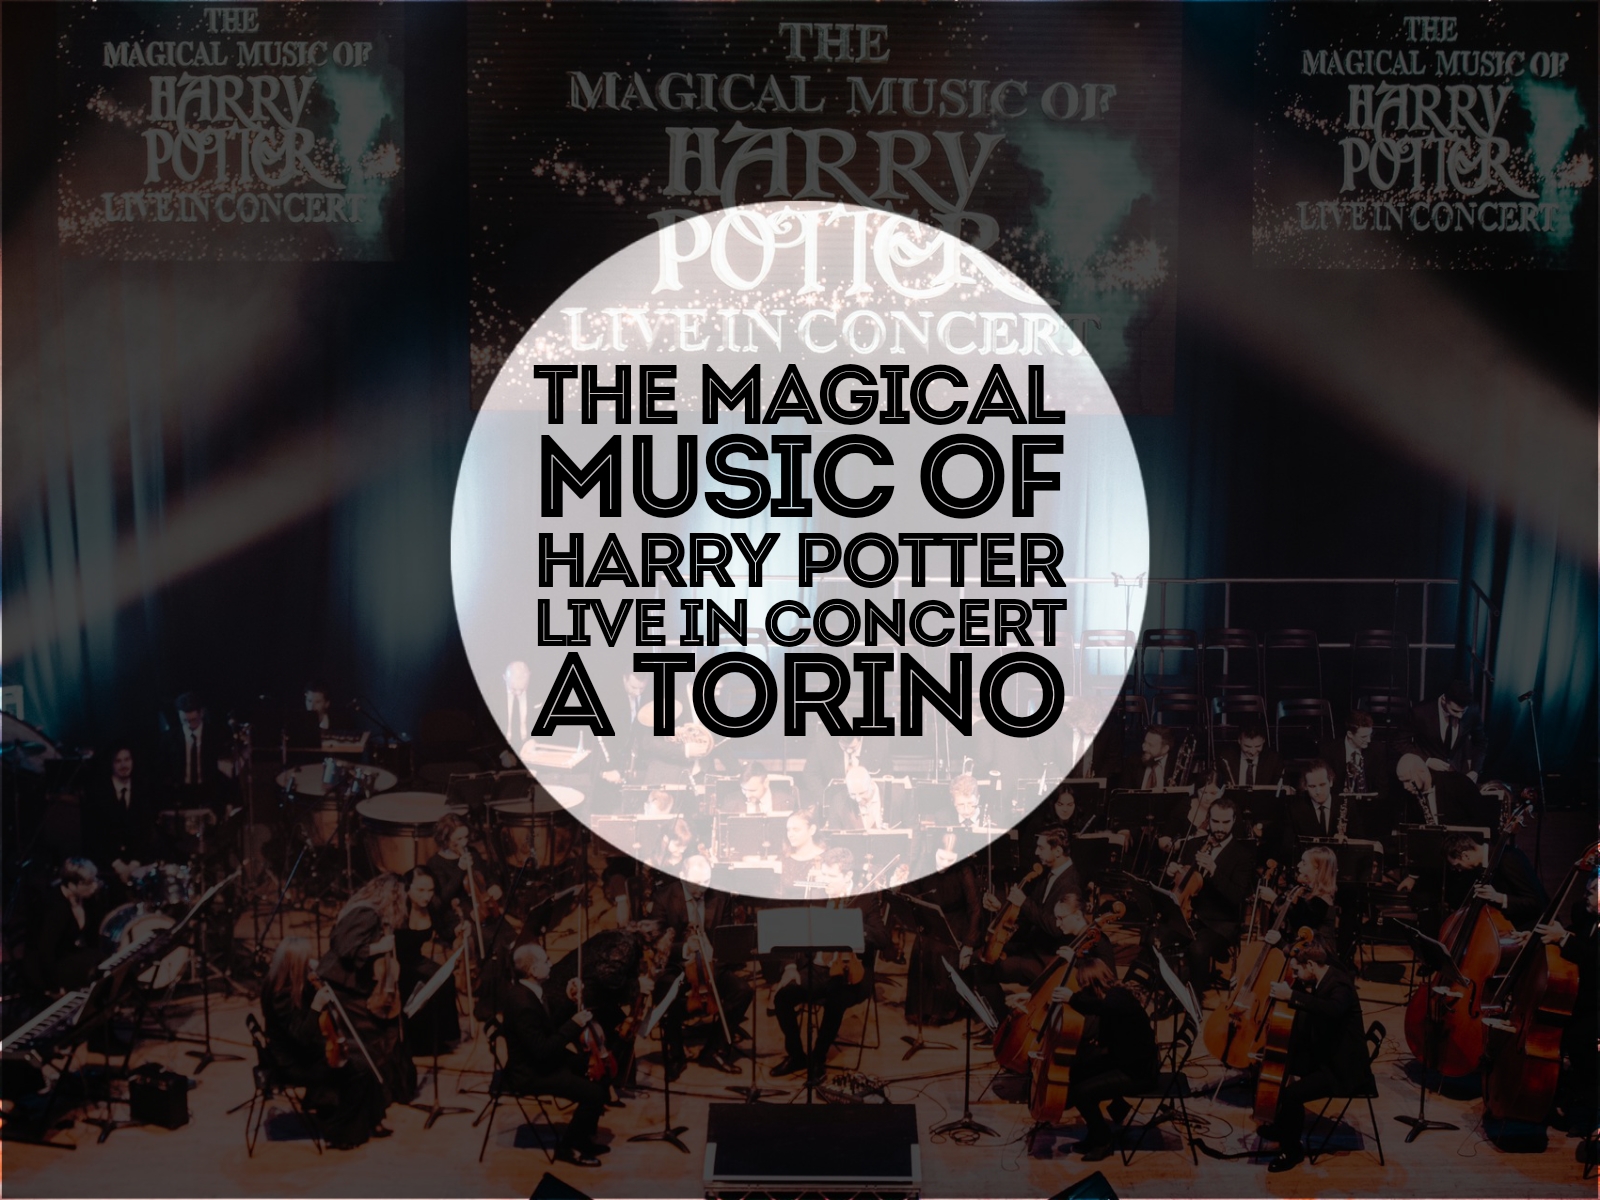 "The Magical Music of Harry Potter – Live in Concert" a Torino